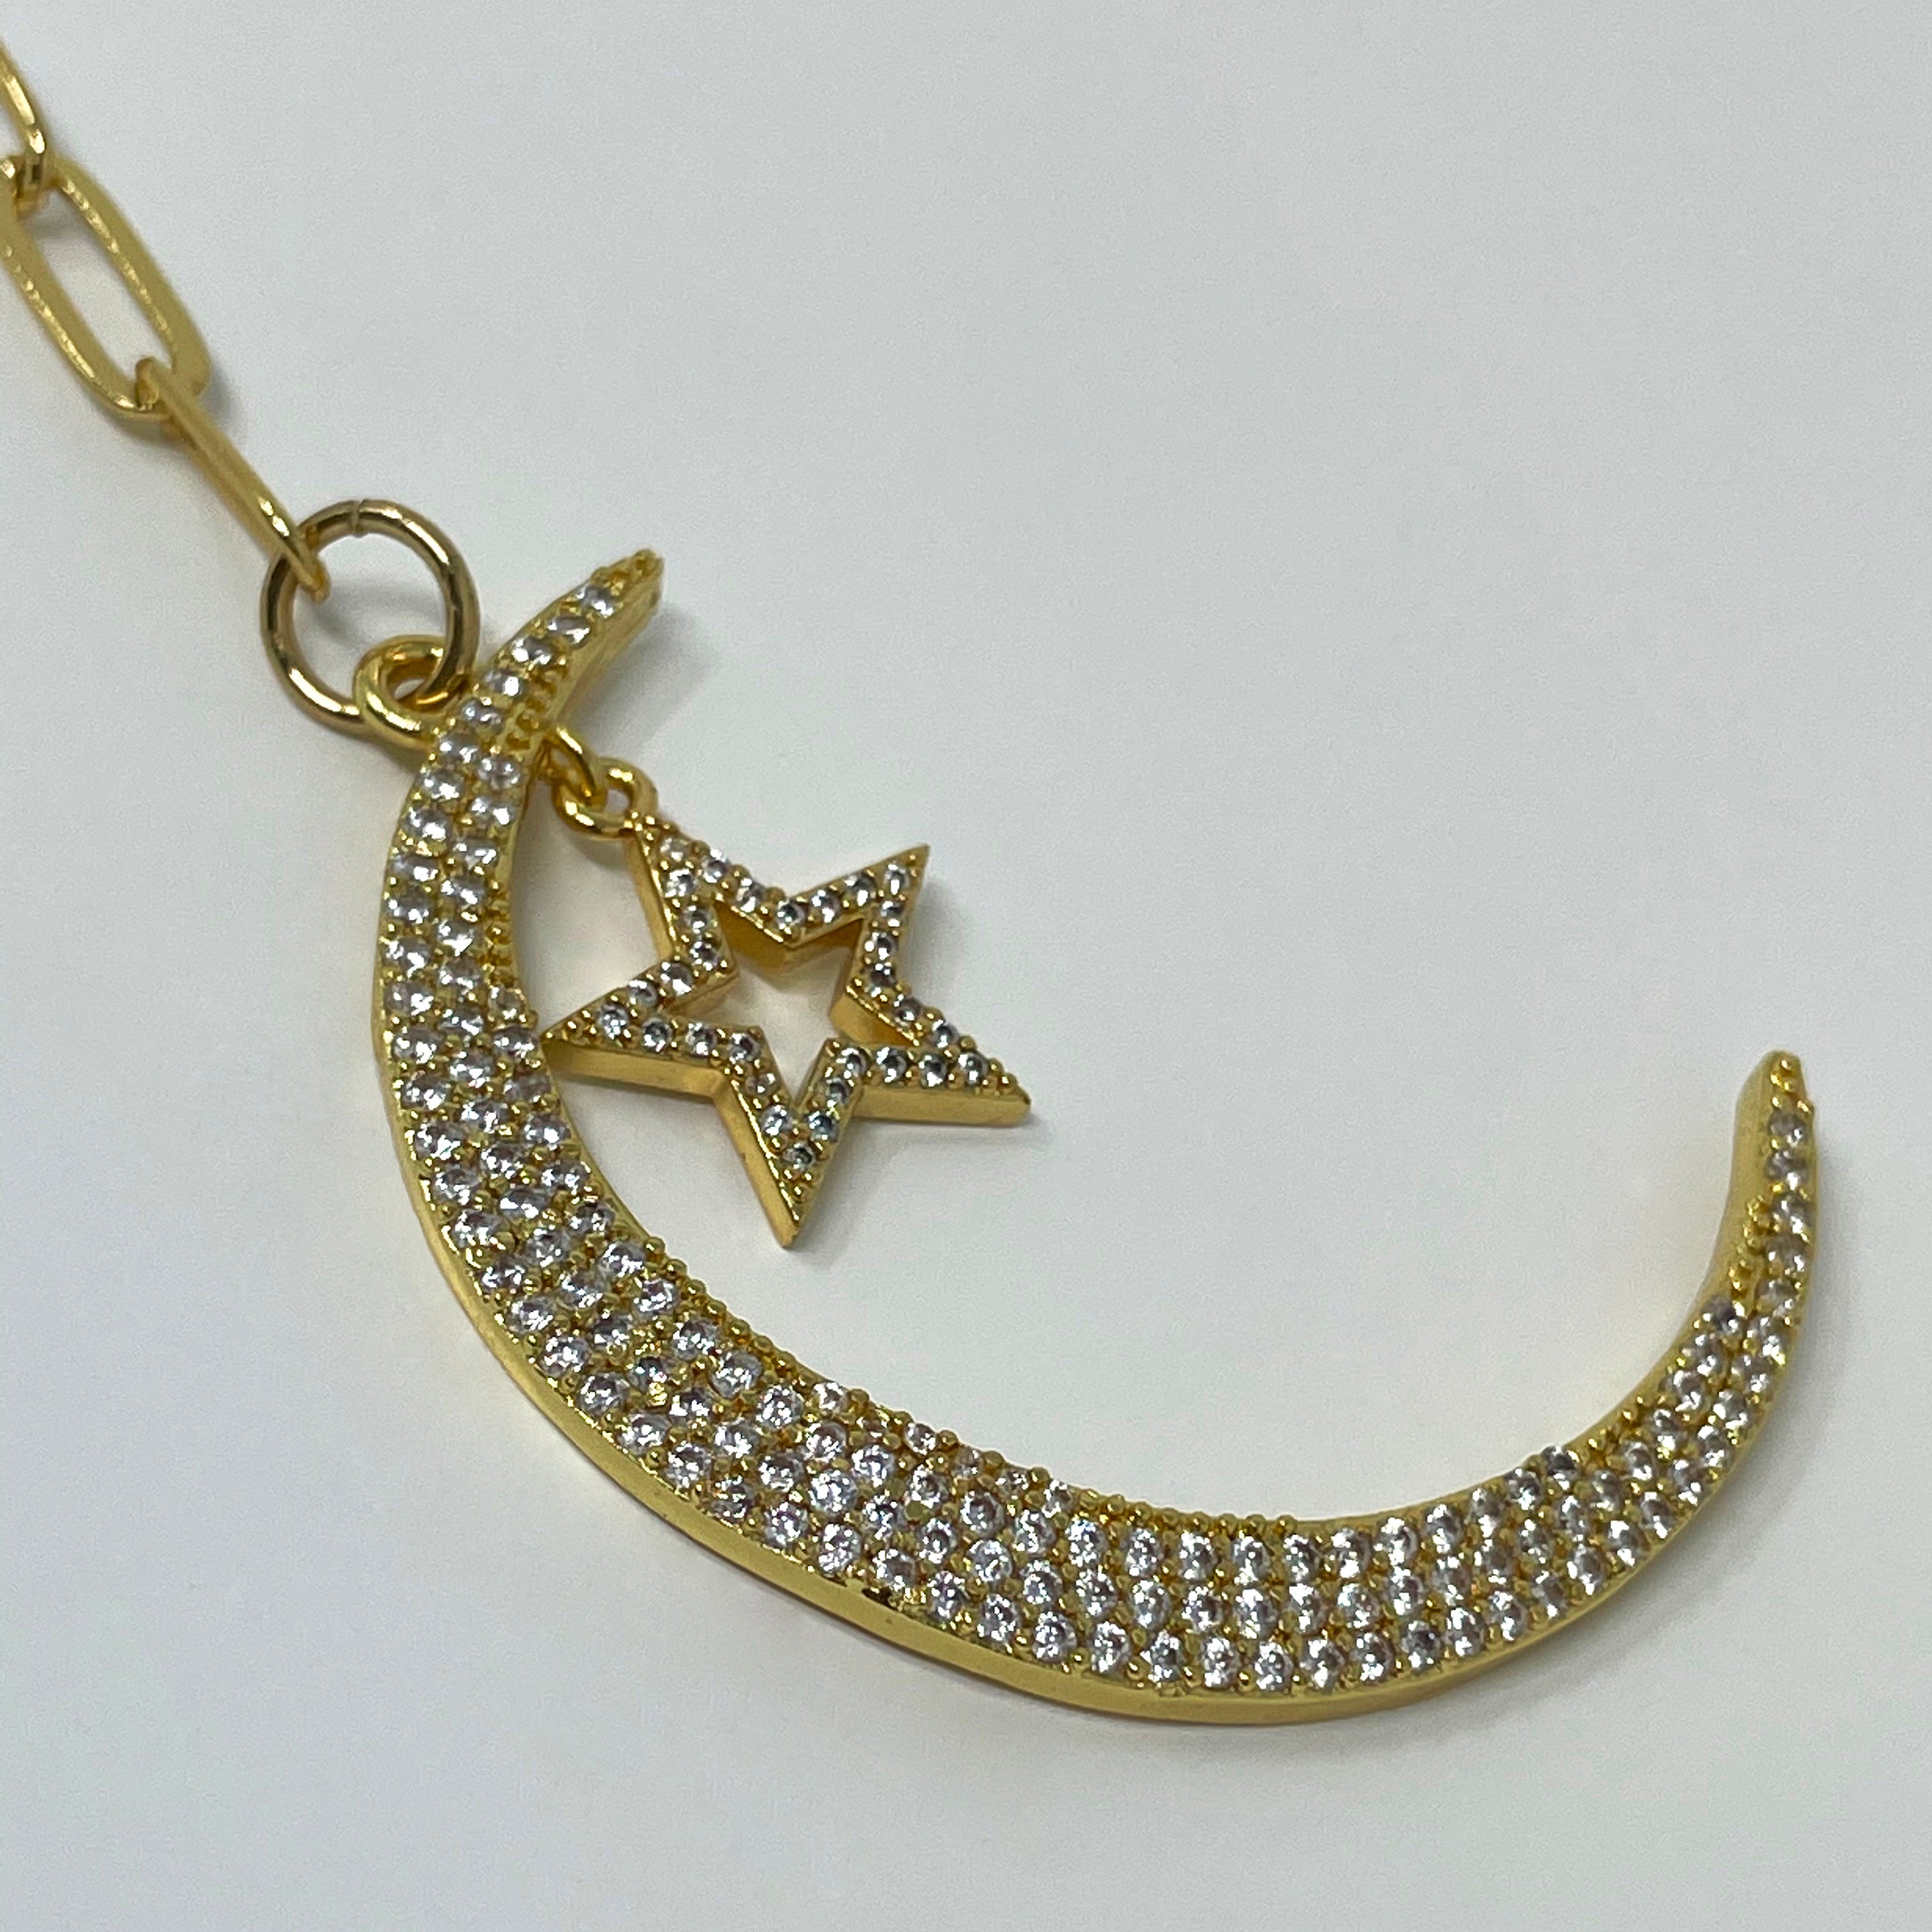 Clip Chain with Rhinestoned Moon and Star Pendant - Custom Made